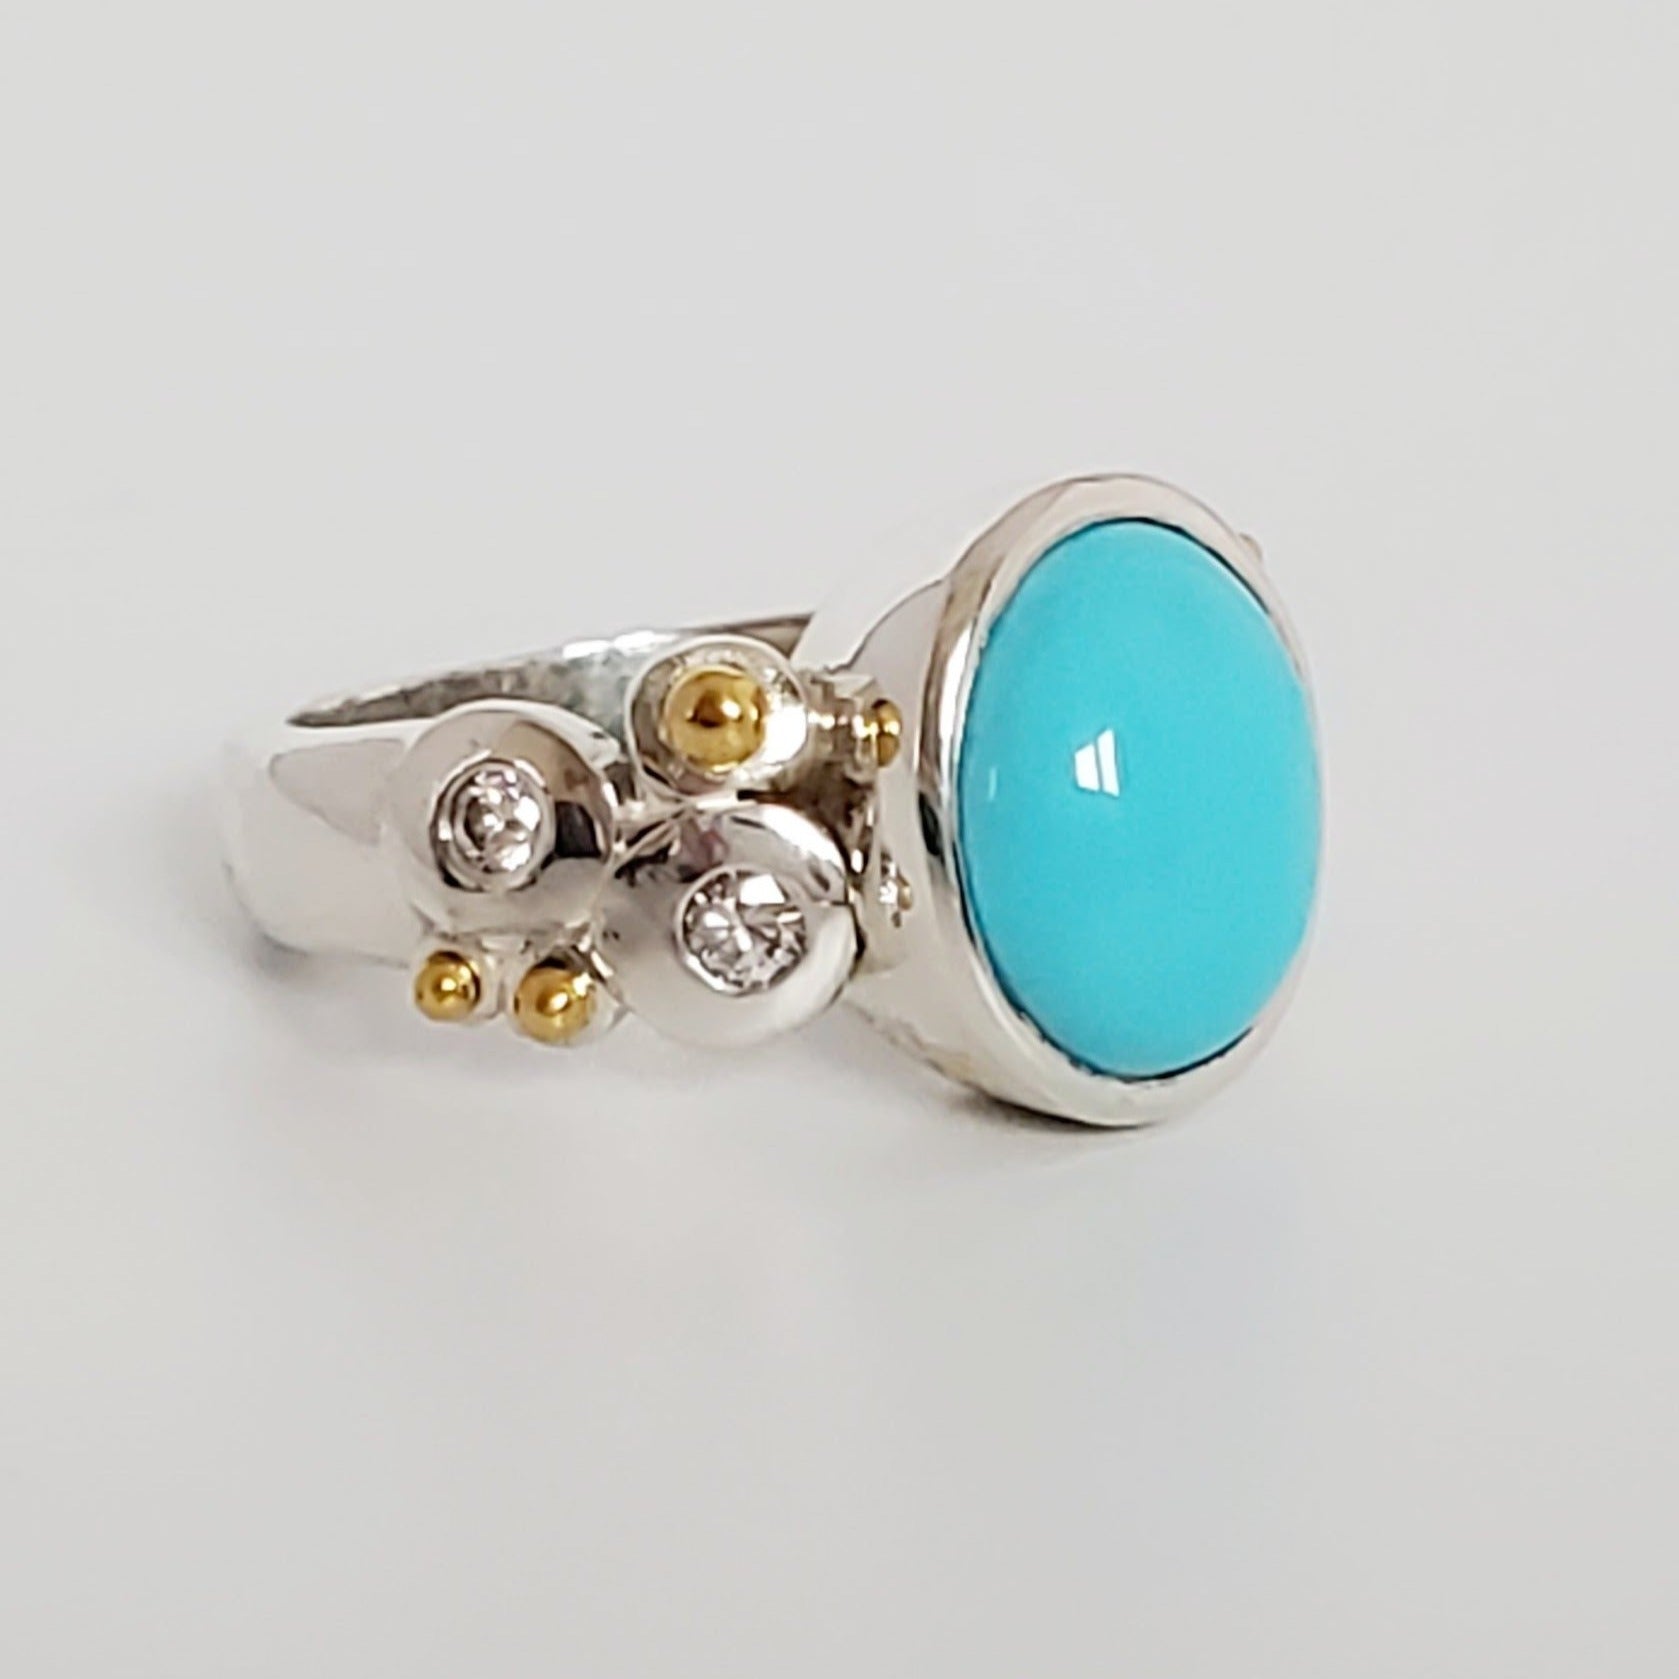 MODERN SILVER, 22kt GOLD & DIAMOND TURQUOISE CABOCHON RING